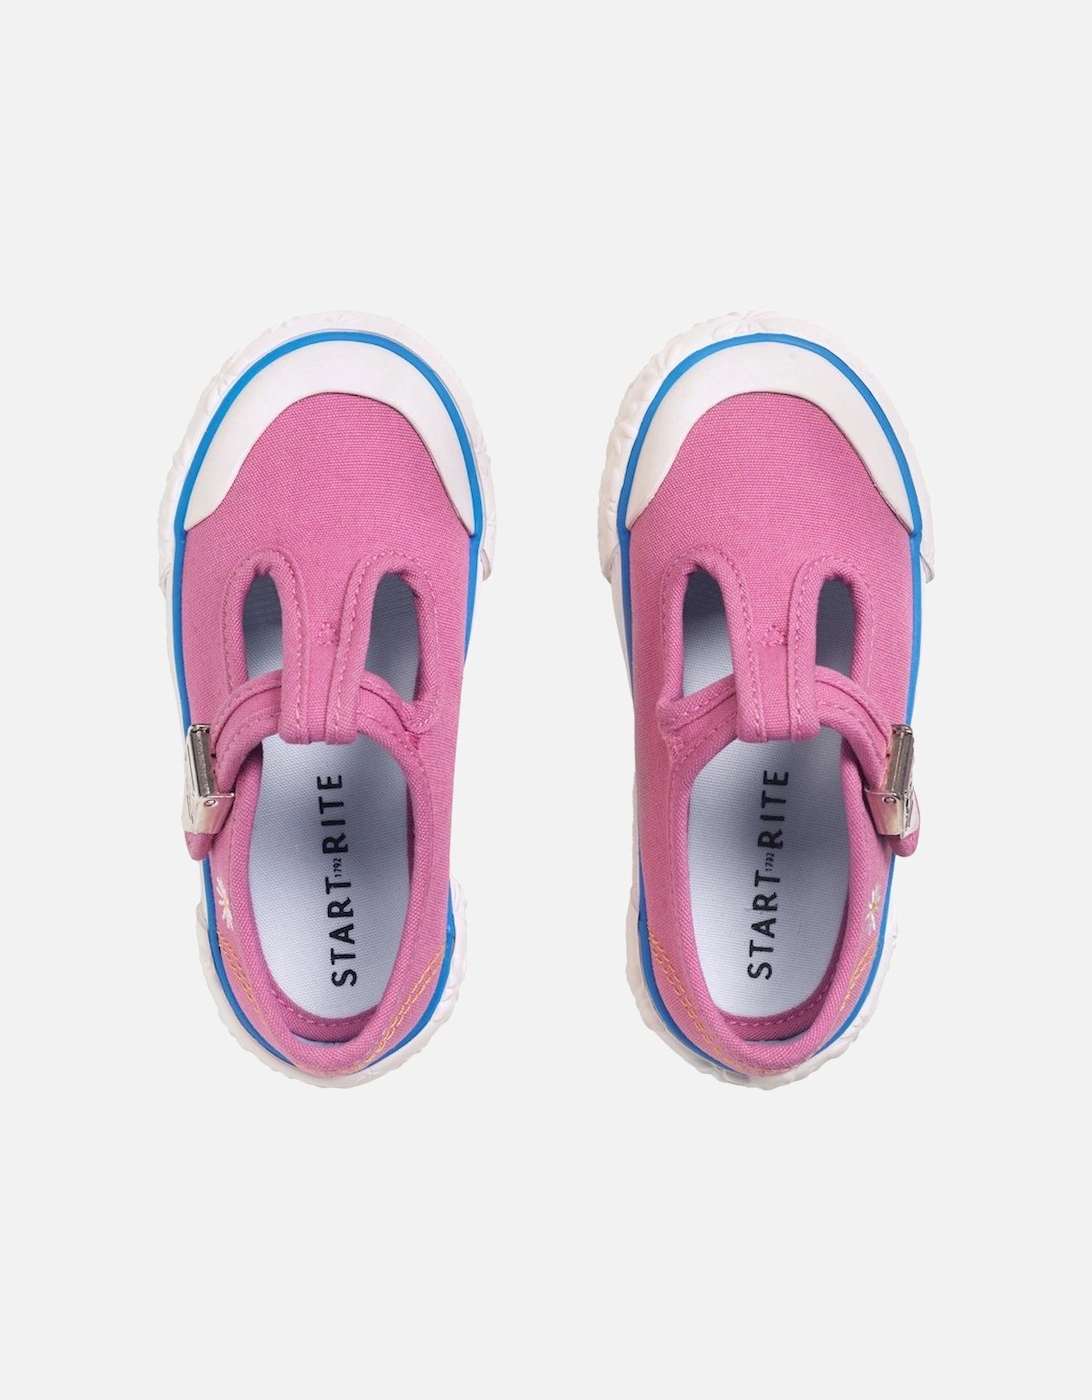 Anchor Girls Infant Canvas Shoes